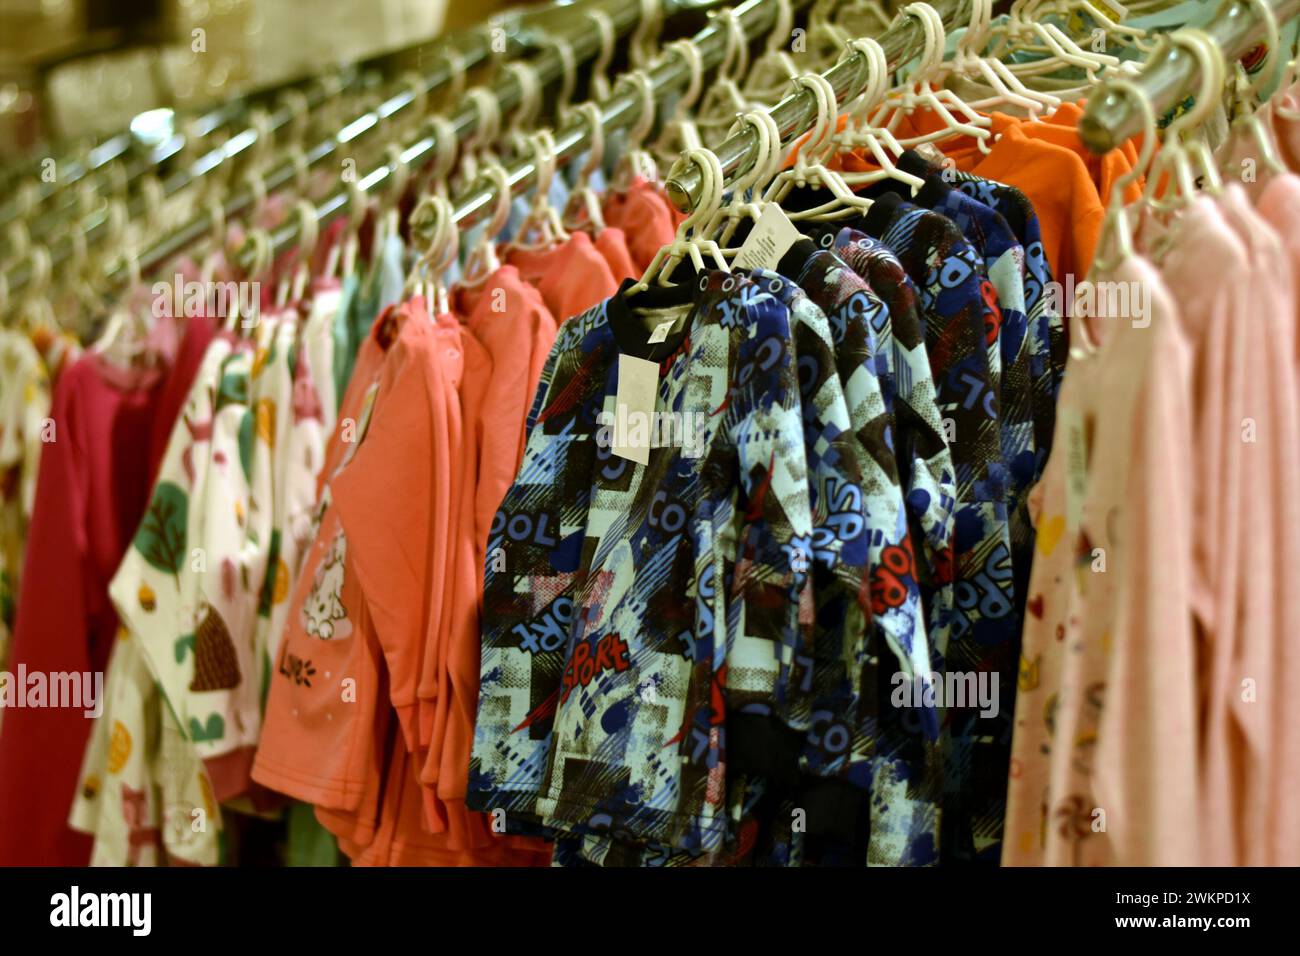 Showcase in a store with children's clothing and blouses. Stock Photo